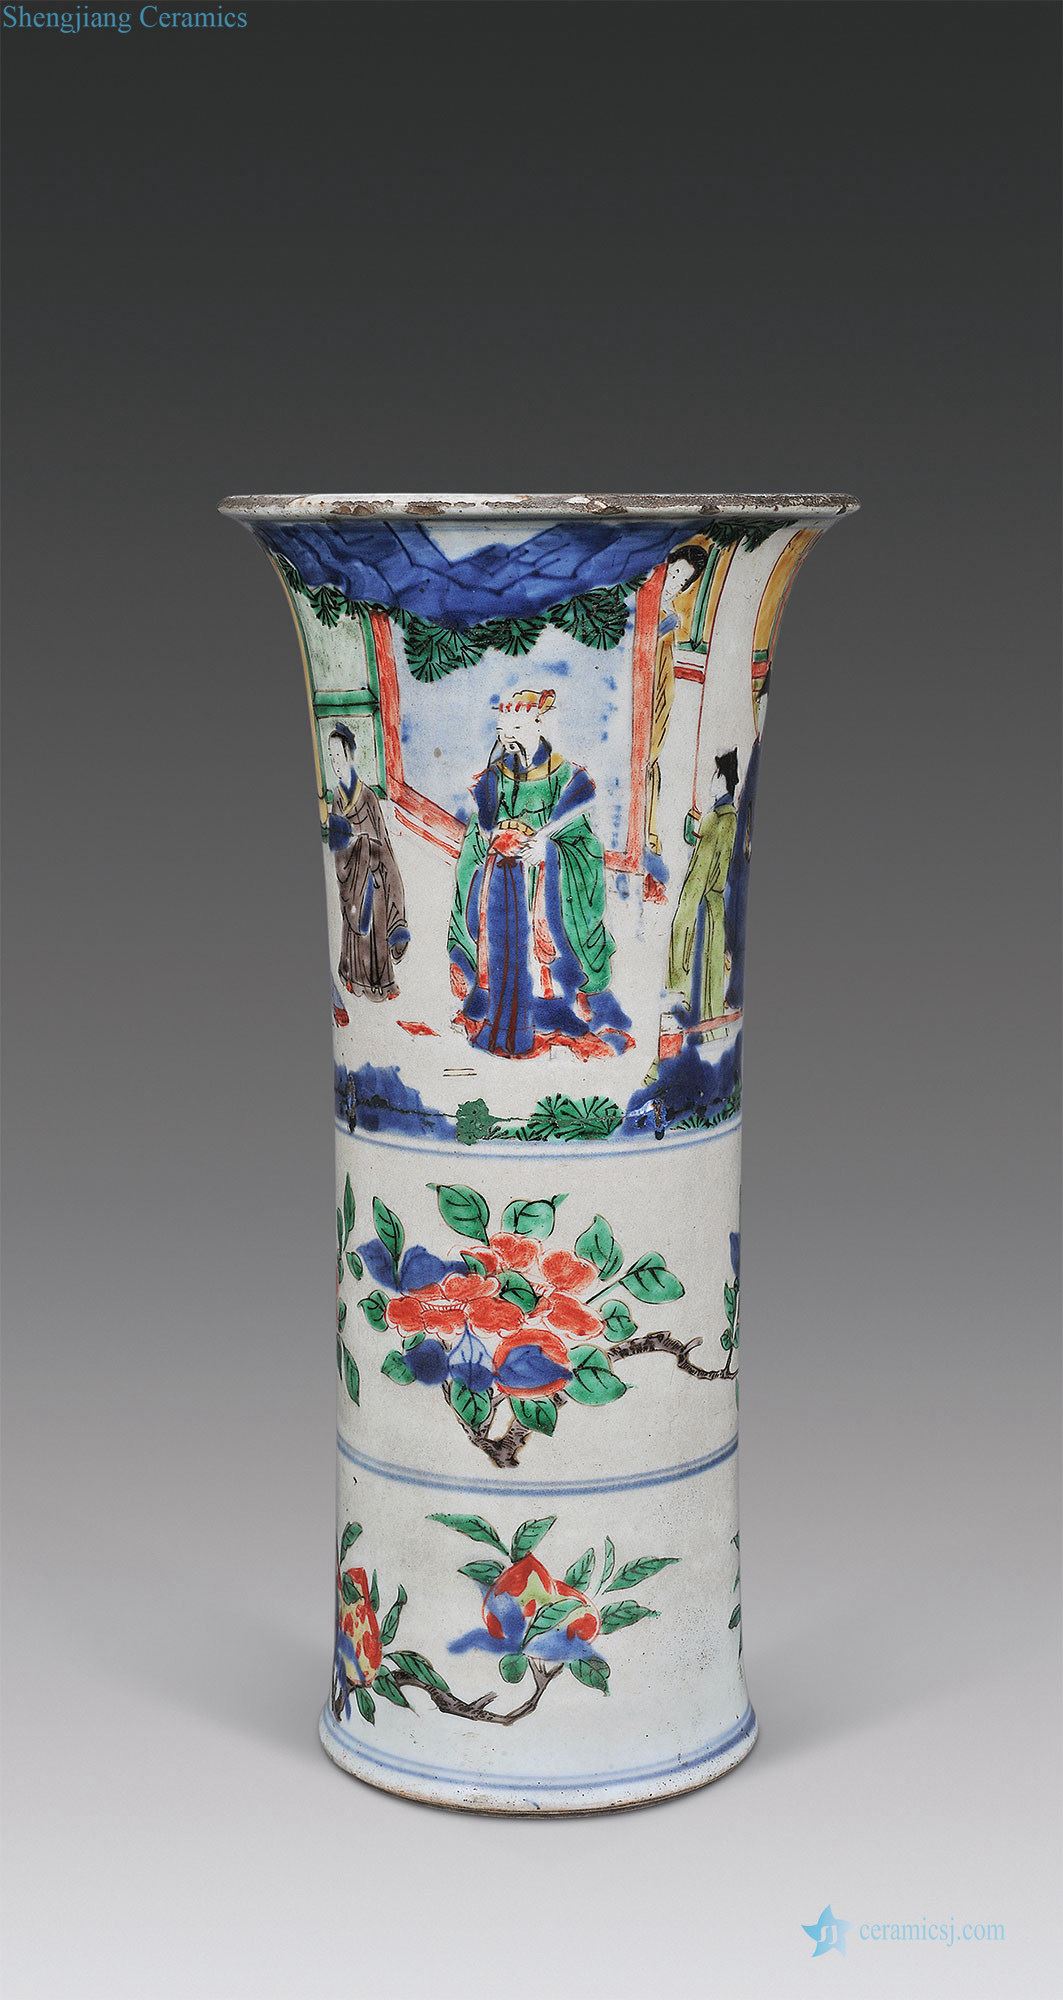 Qing shunzhi Blue and white stripes flower vase with colorful characters